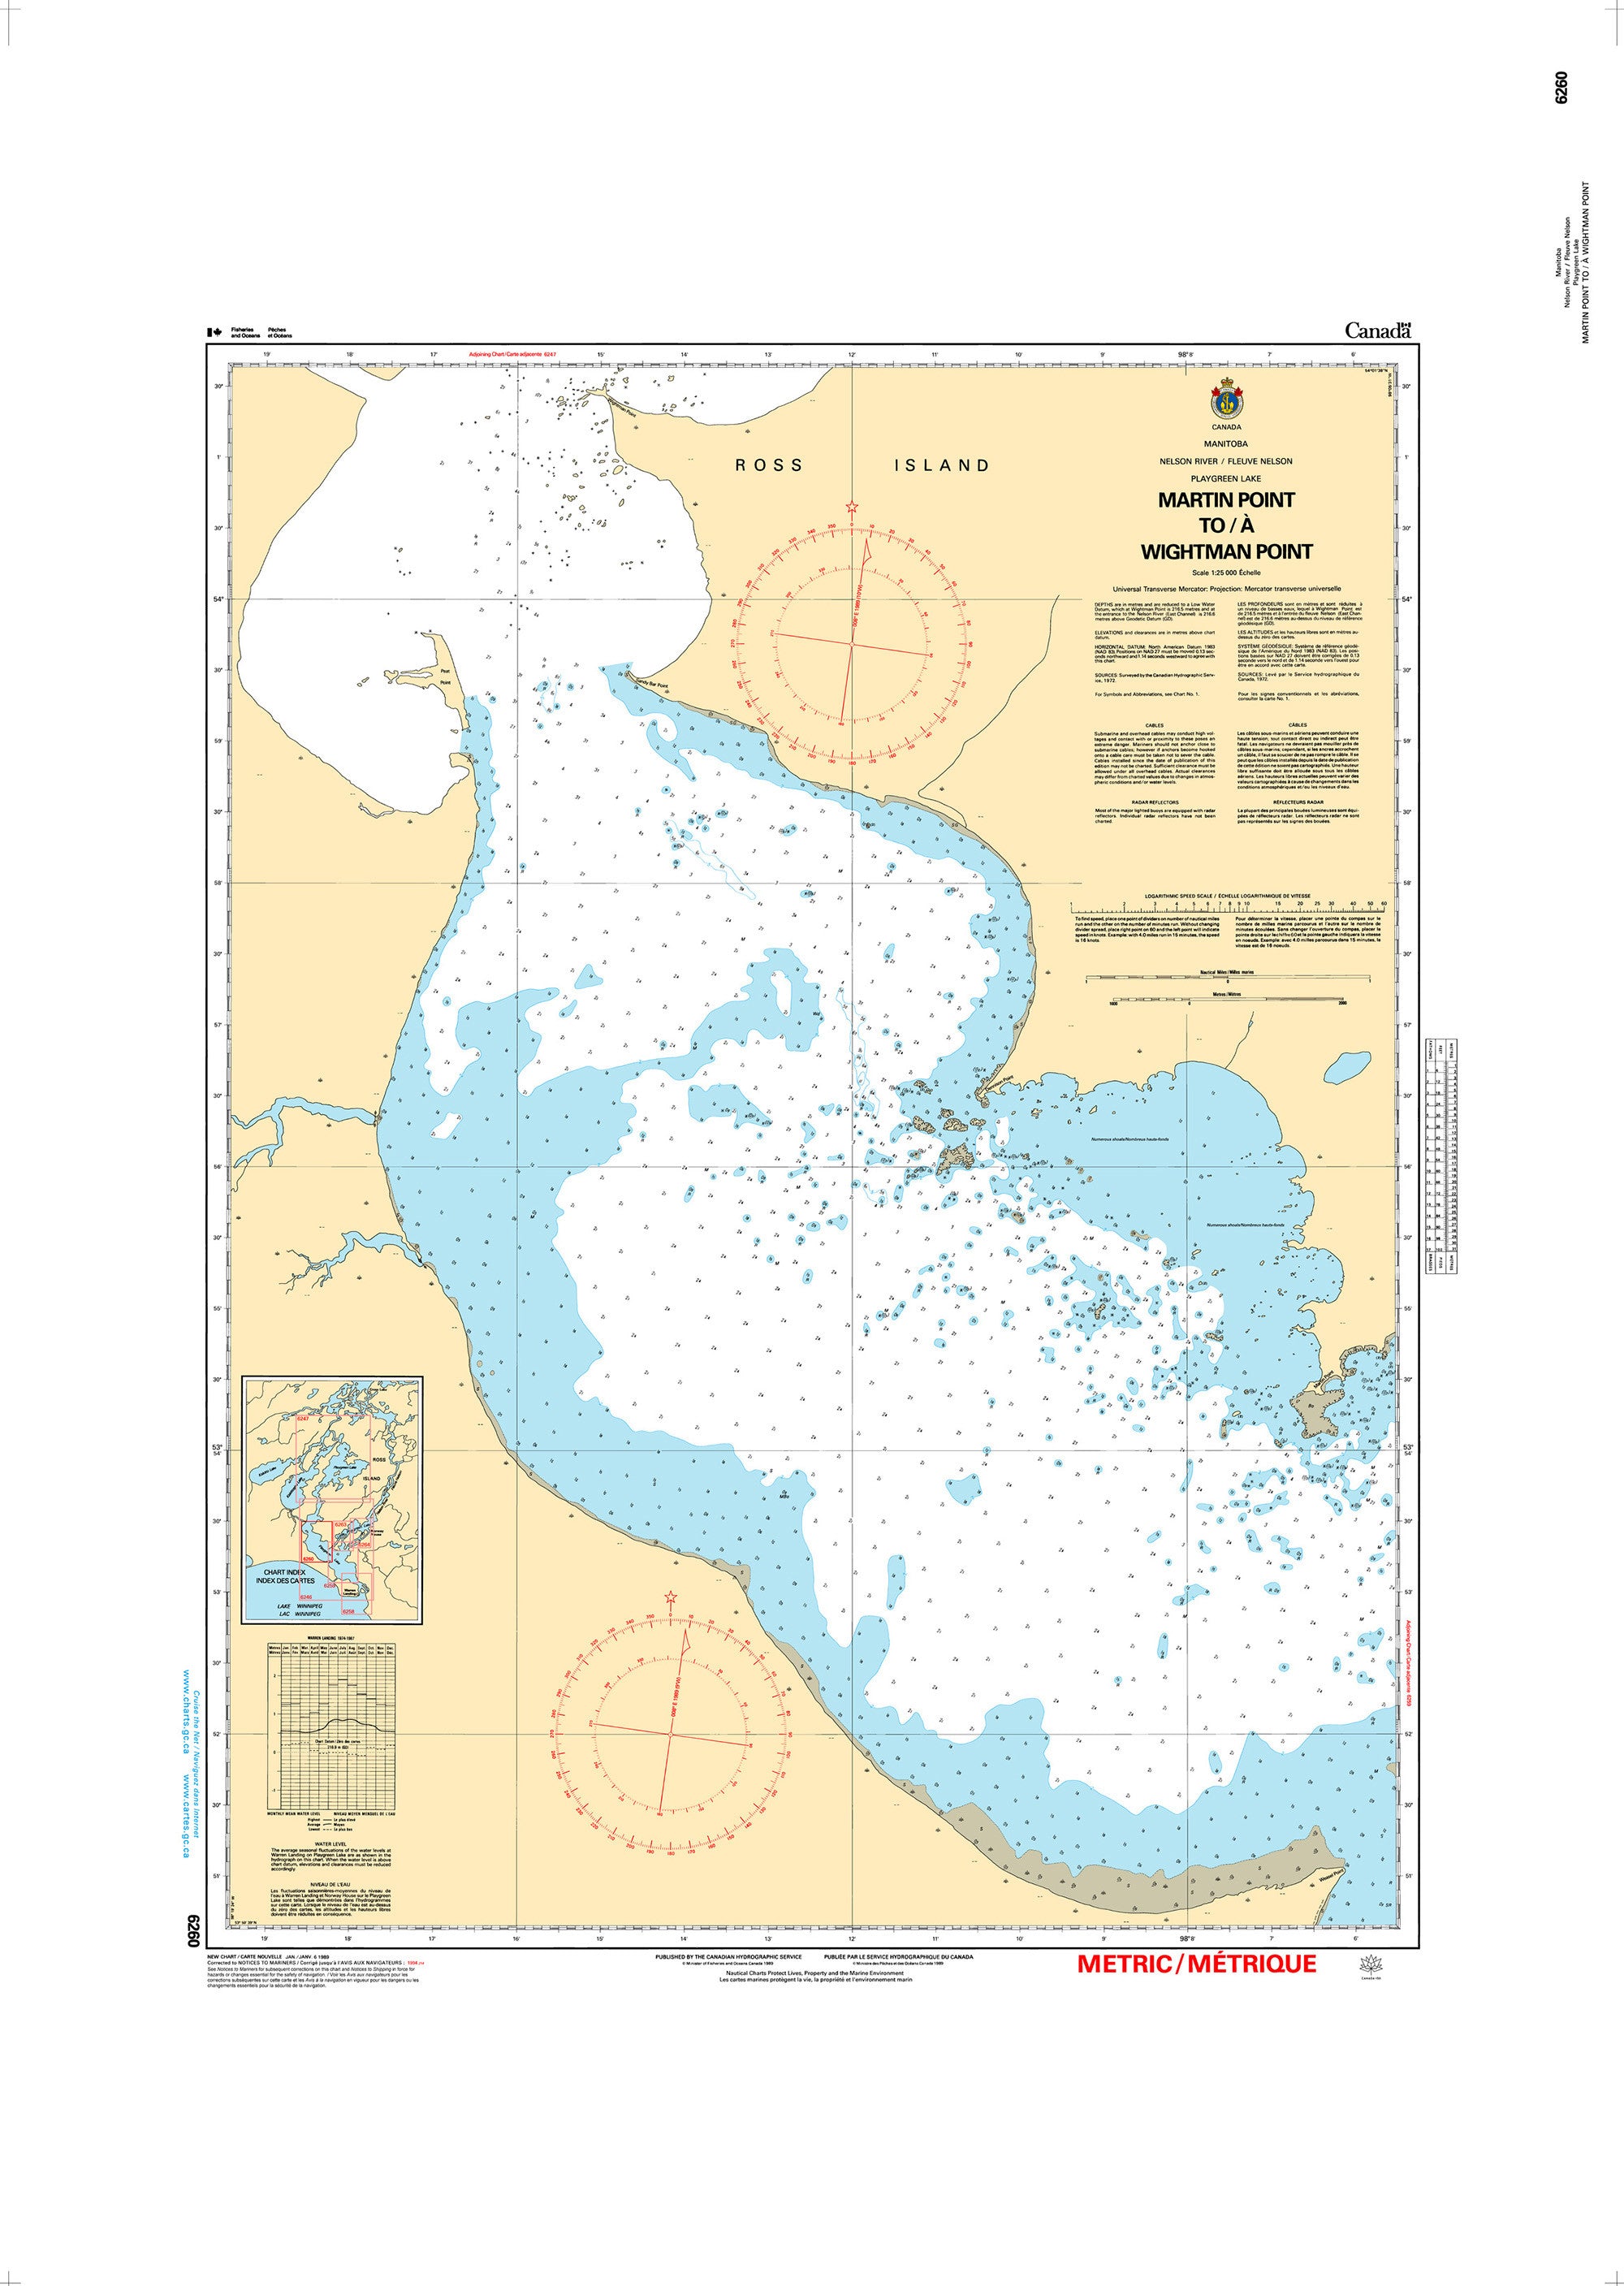 Canadian Hydrographic Service Nautical Chart CHS6260: Martin Point to/à Wightman Point